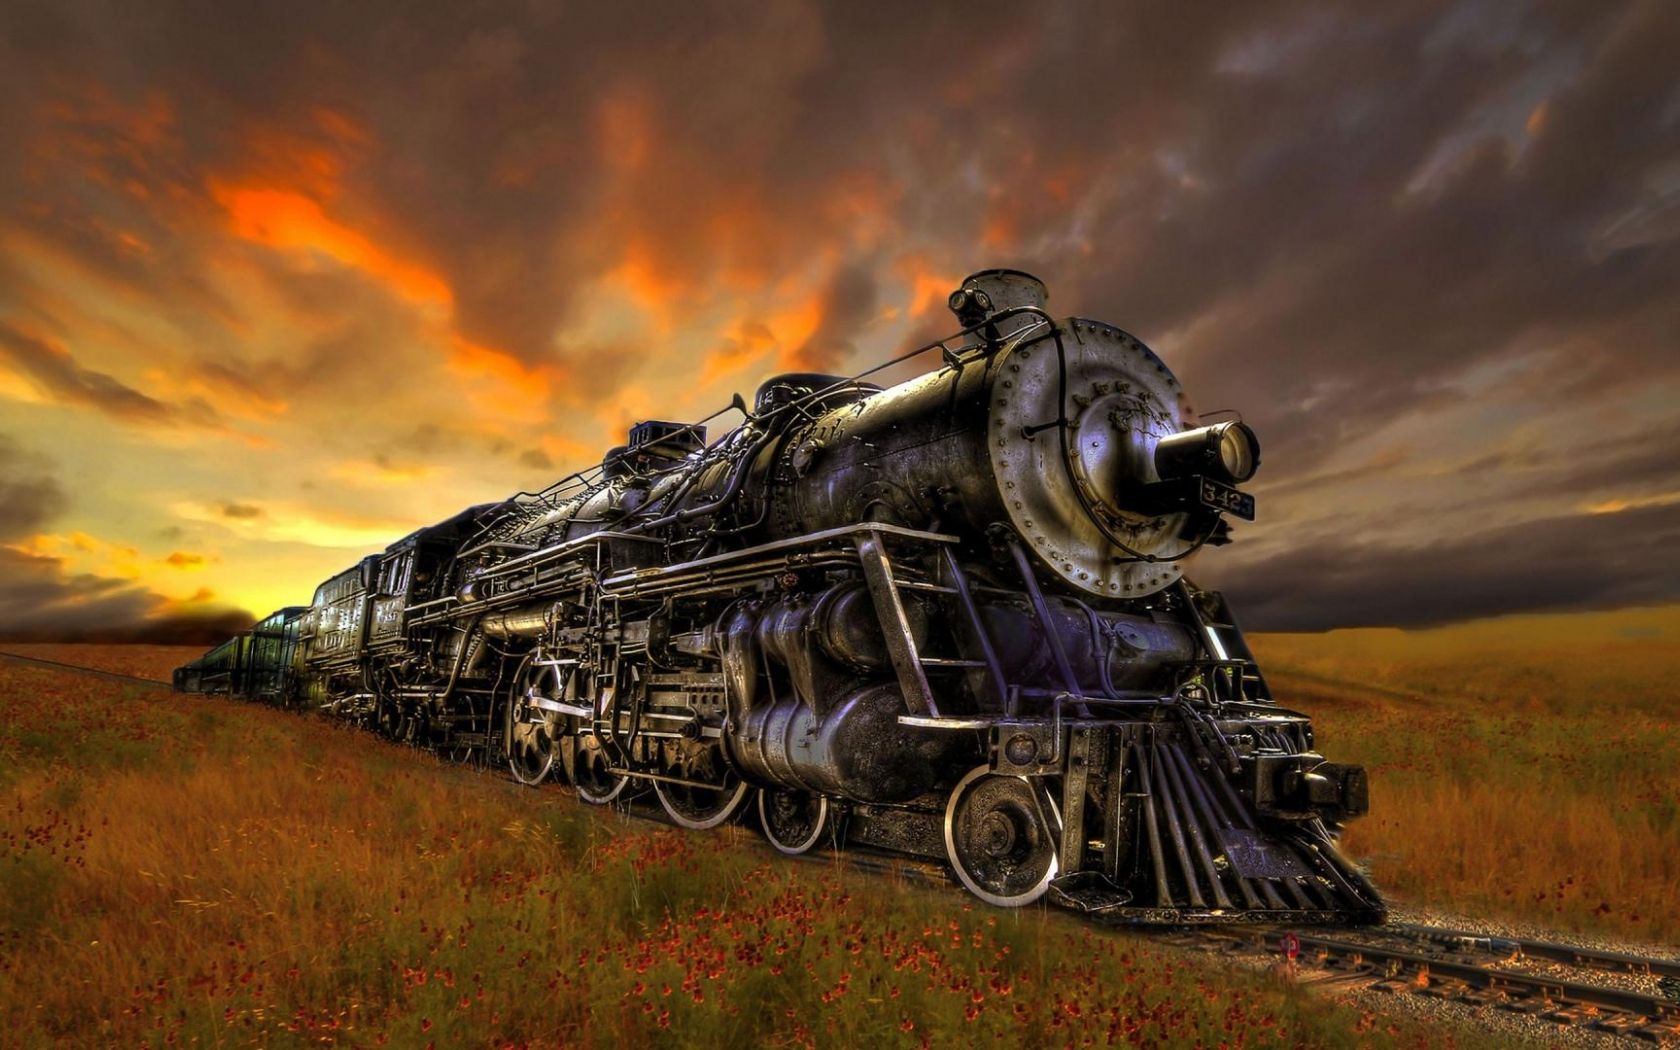 Free download Download Steam Train Wallpaper HD picture in high